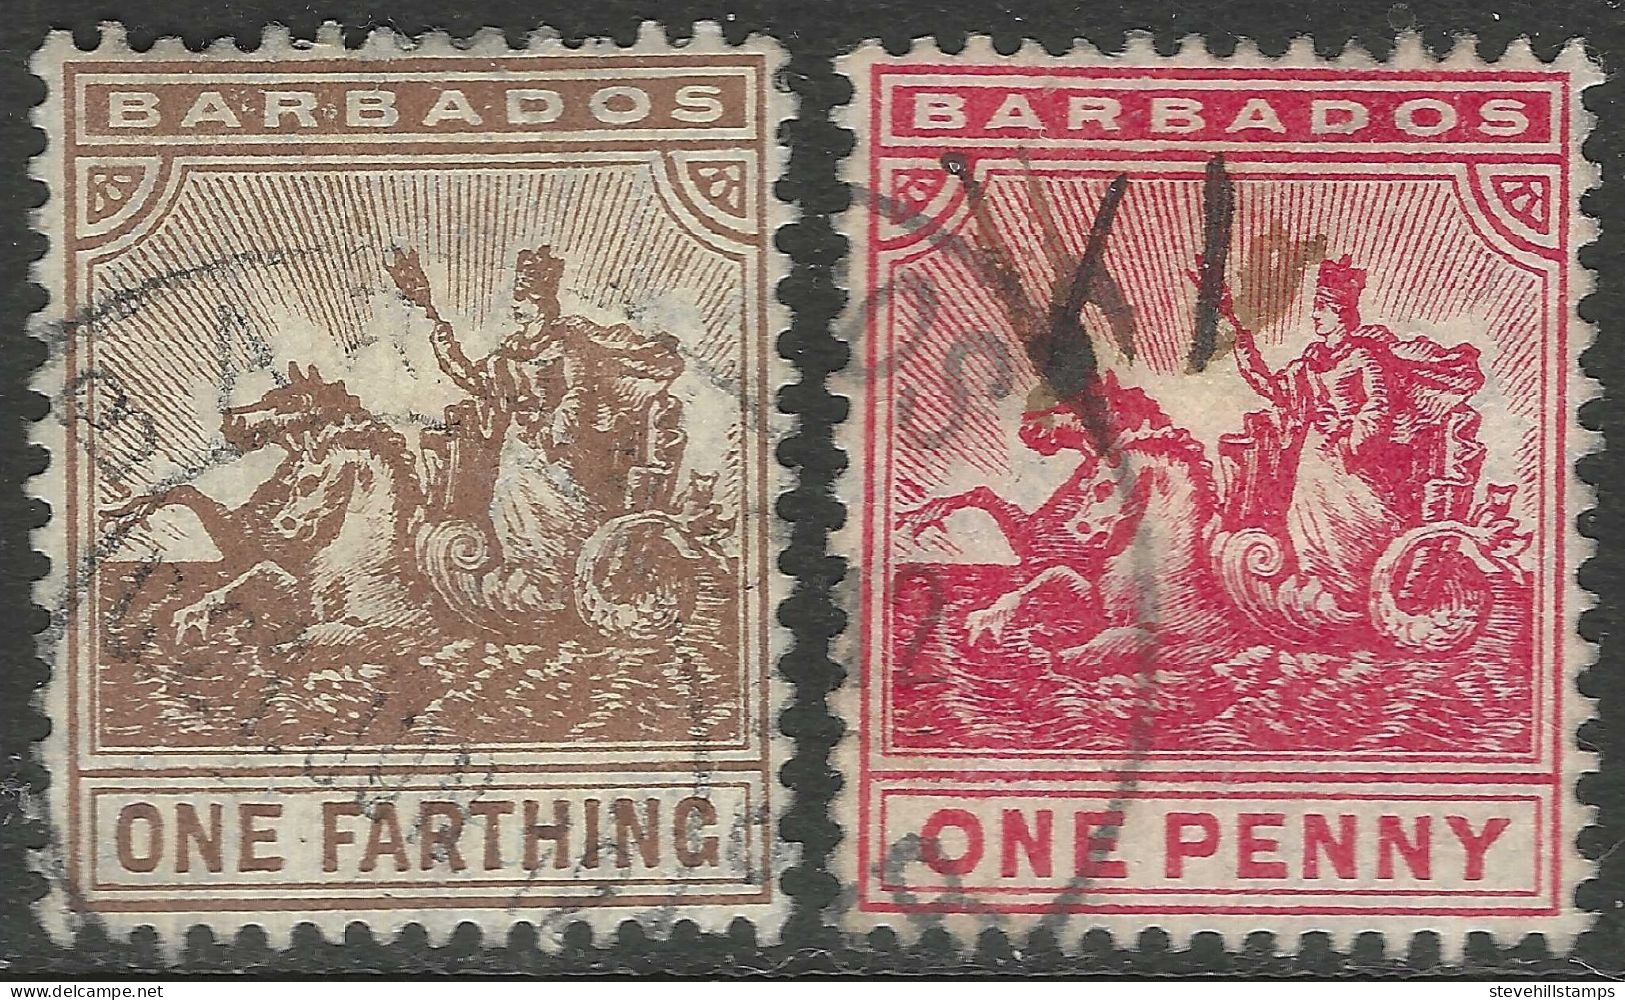 Barbados. 1909-10 Seal Of Colony. ¼d, 1d Used. Mult Crown CA W/M SG 163, 165. M4073 - Barbades (...-1966)